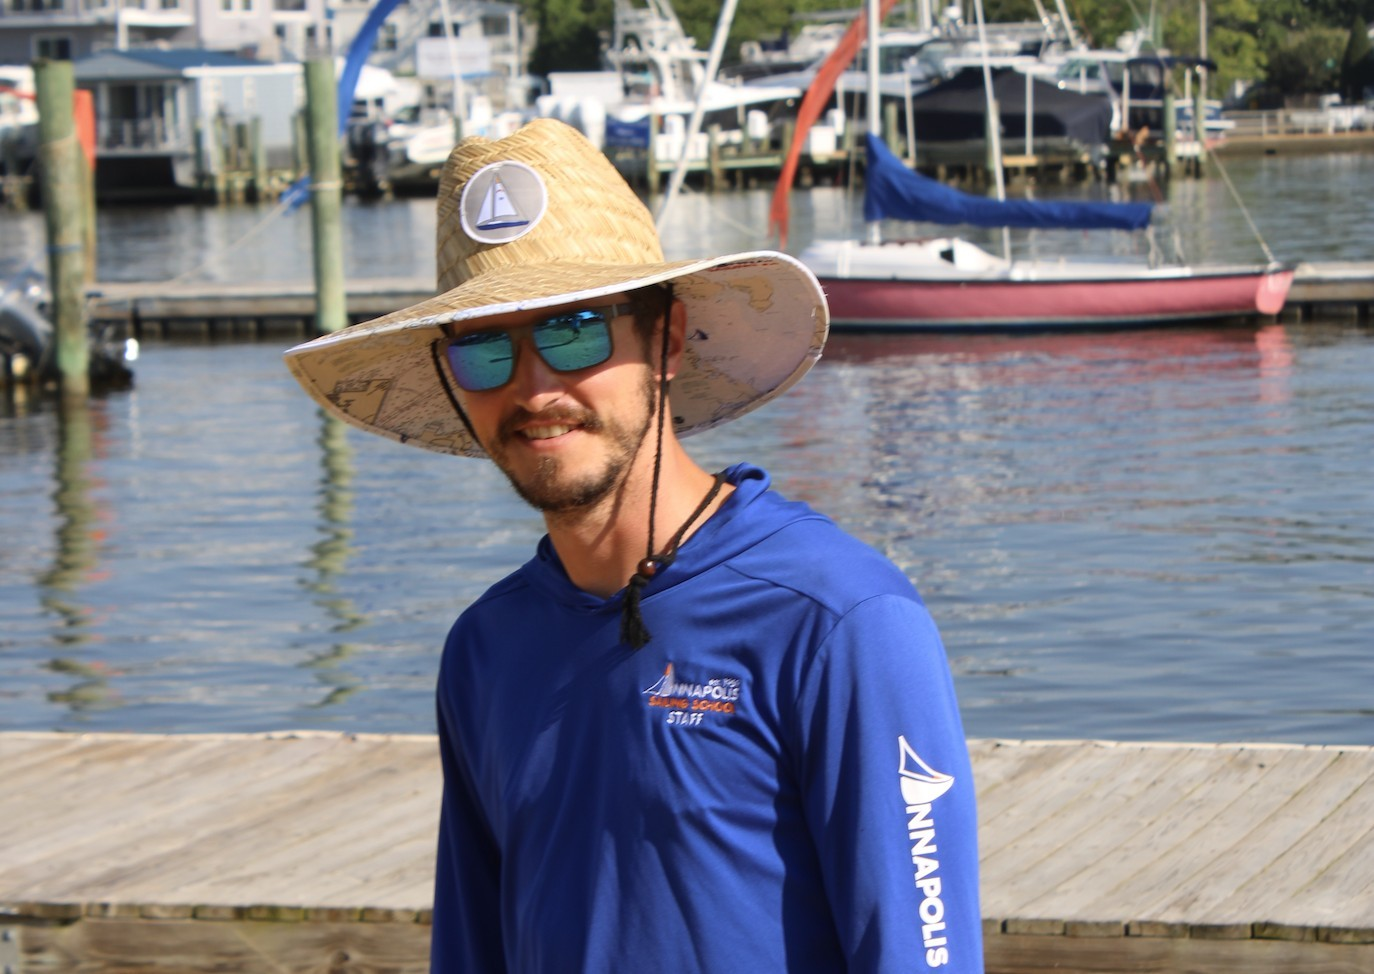 At the Annapolis Sailing School, wide-brimmed hats and long-sleeved tech shirts are encouraged for the greatest amount of sun protection.